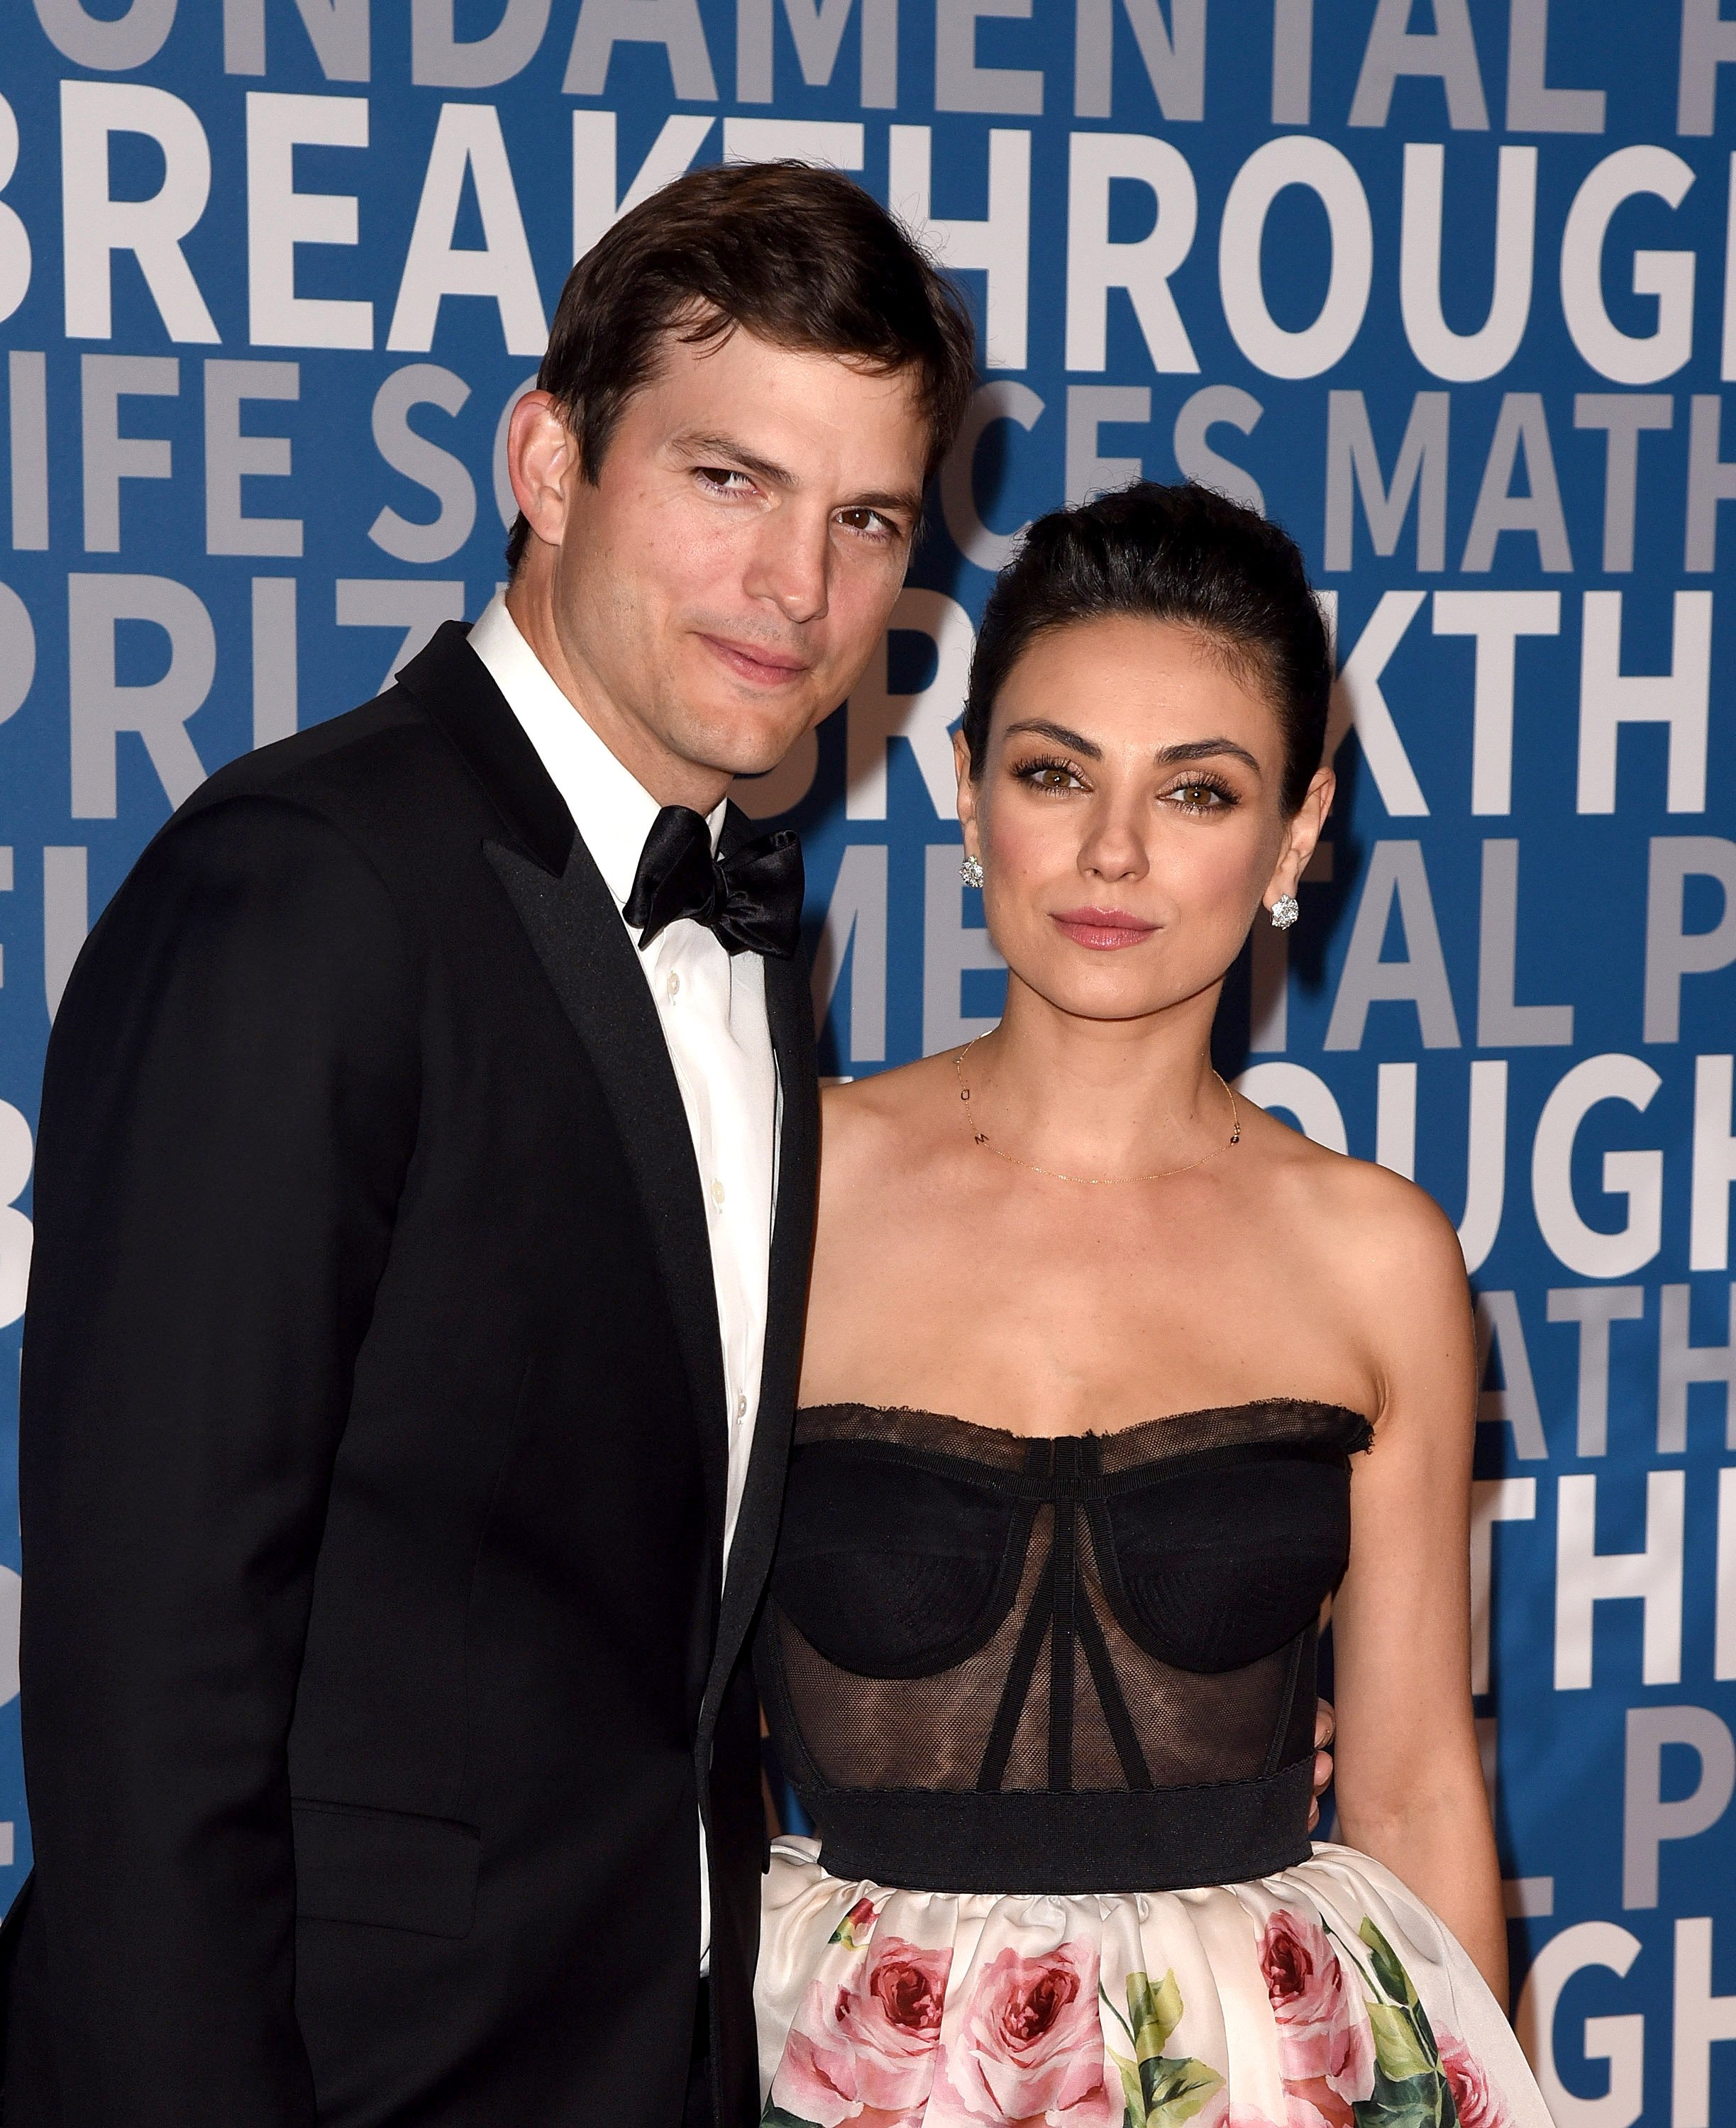  Ashton Kutcher and Mila Kunis attend the 6th Annual Breakthrough Prize at NASA Ames Research Center on December 3, 2017 | Source: Getty  Images 